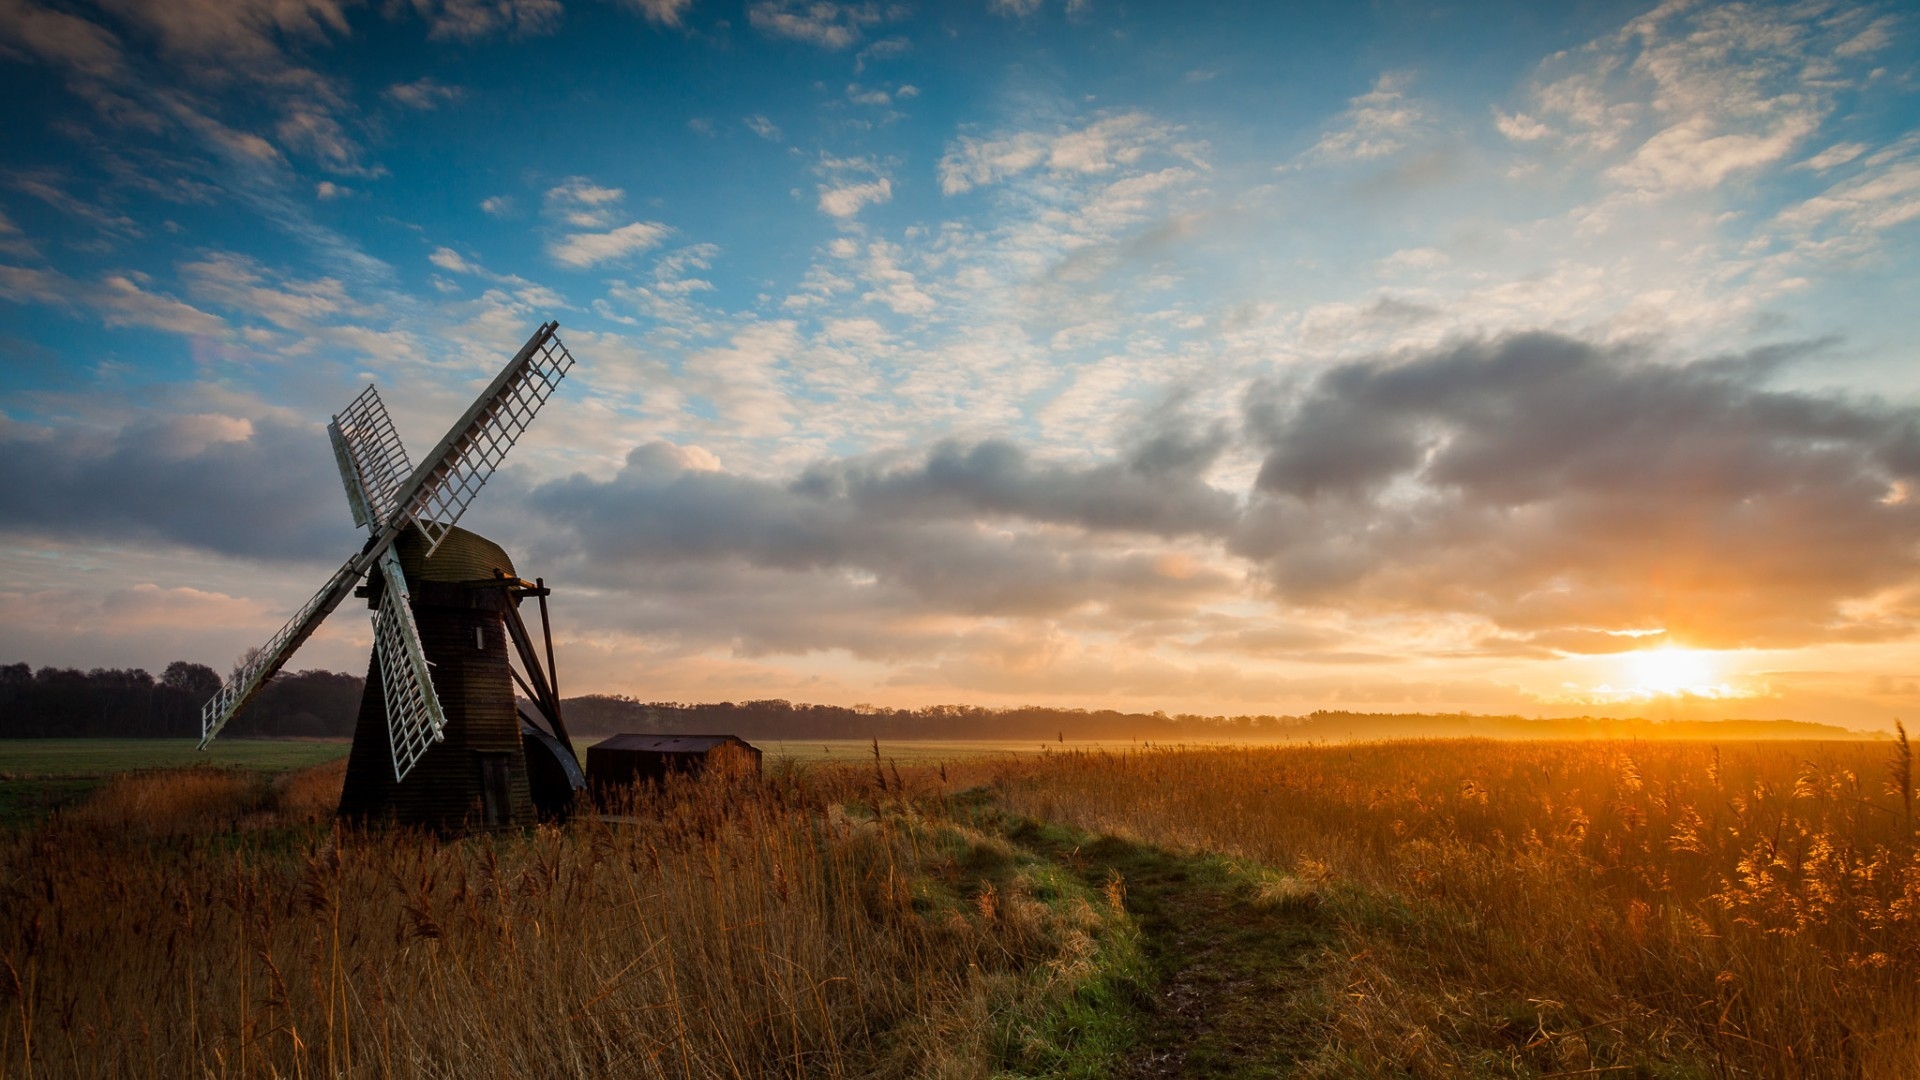 Old Windmill for 1920 x 1080 HDTV 1080p resolution